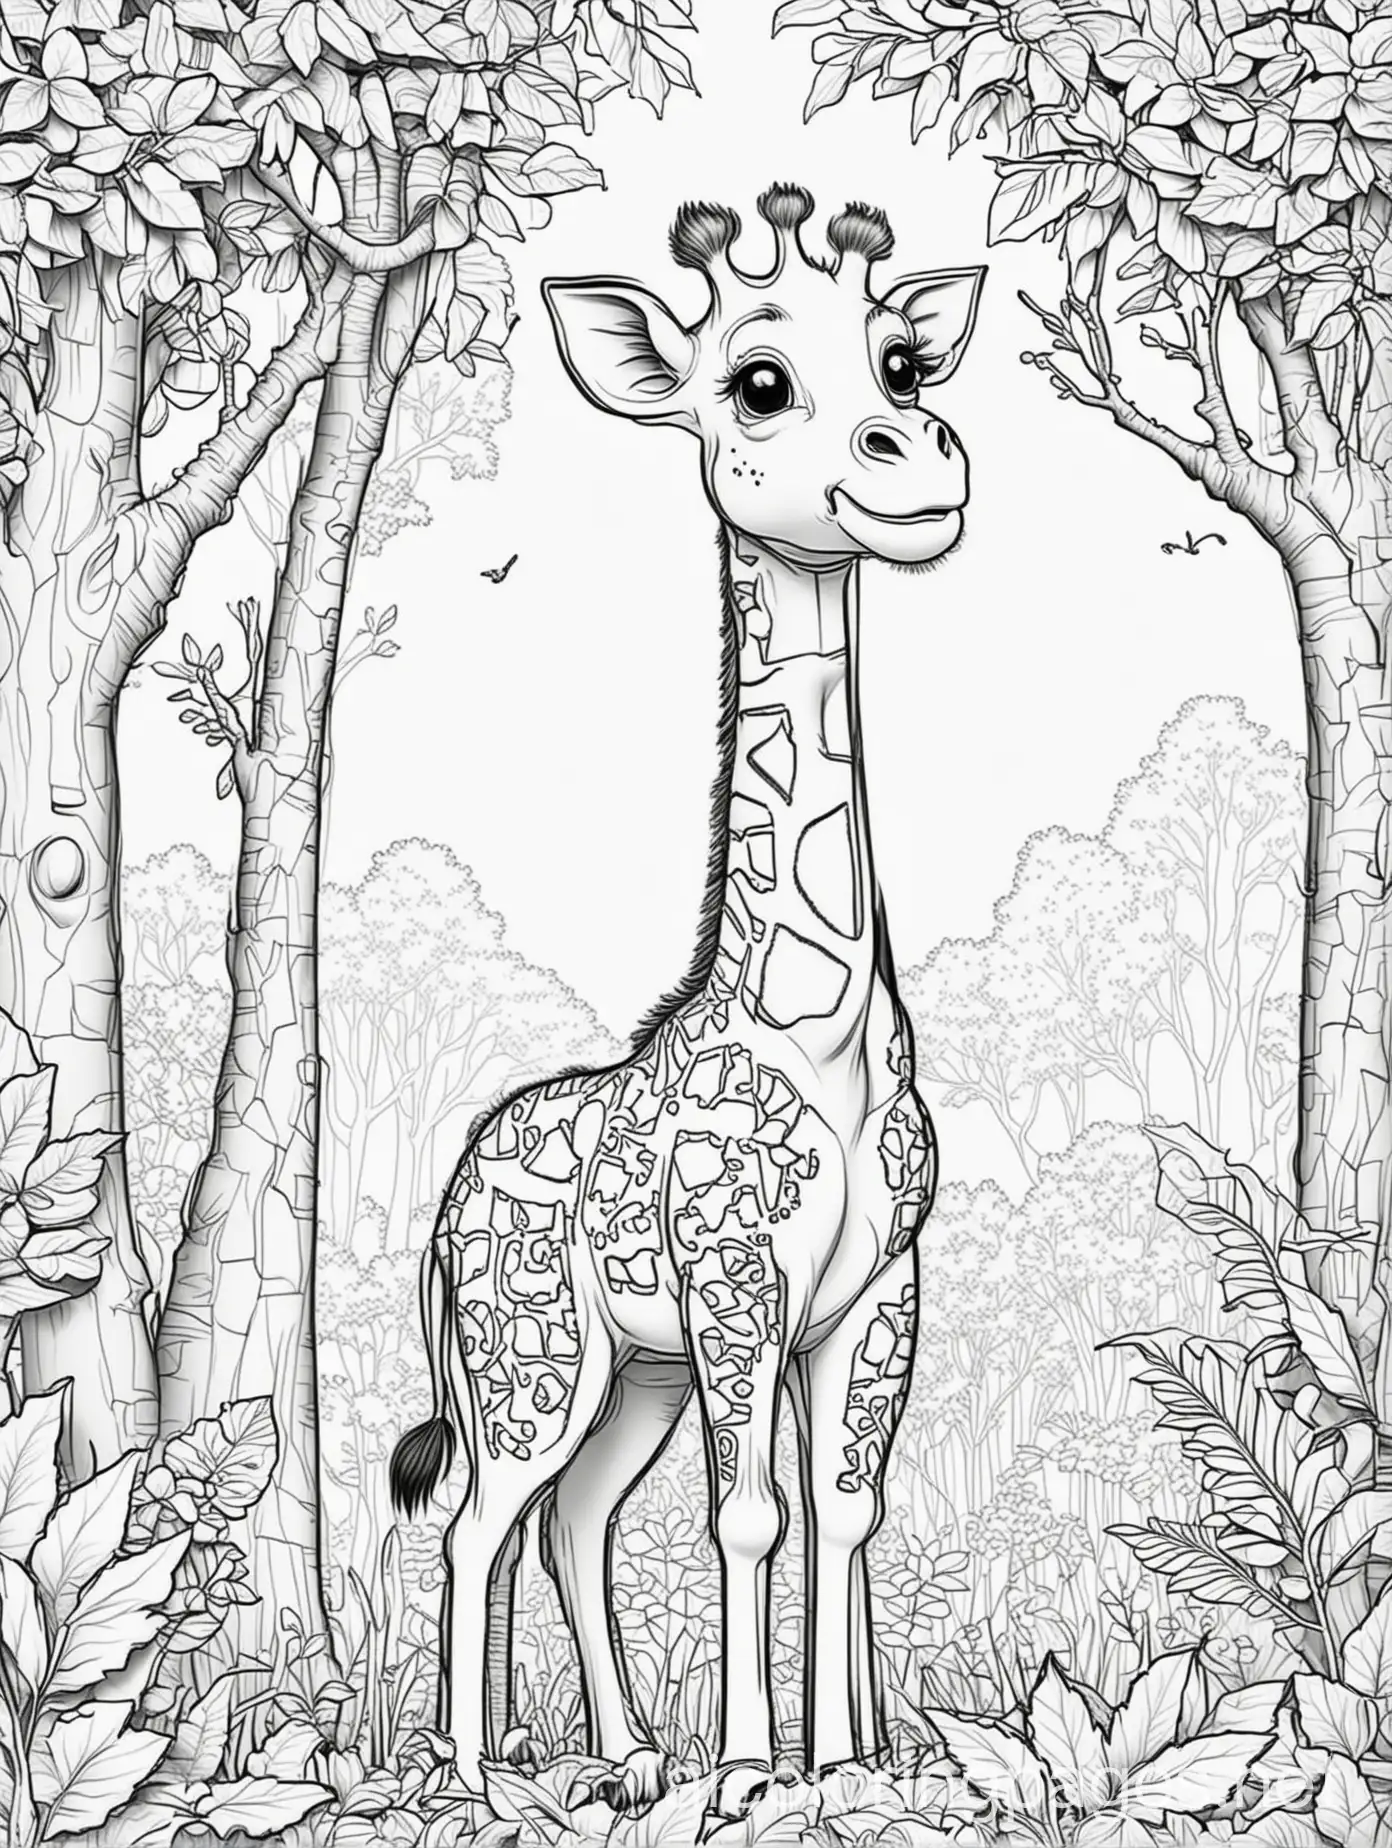 Happy-Cartoon-Giraffe-Playing-in-Forest-Coloring-Page-Black-and-White-Line-Art-for-Kids